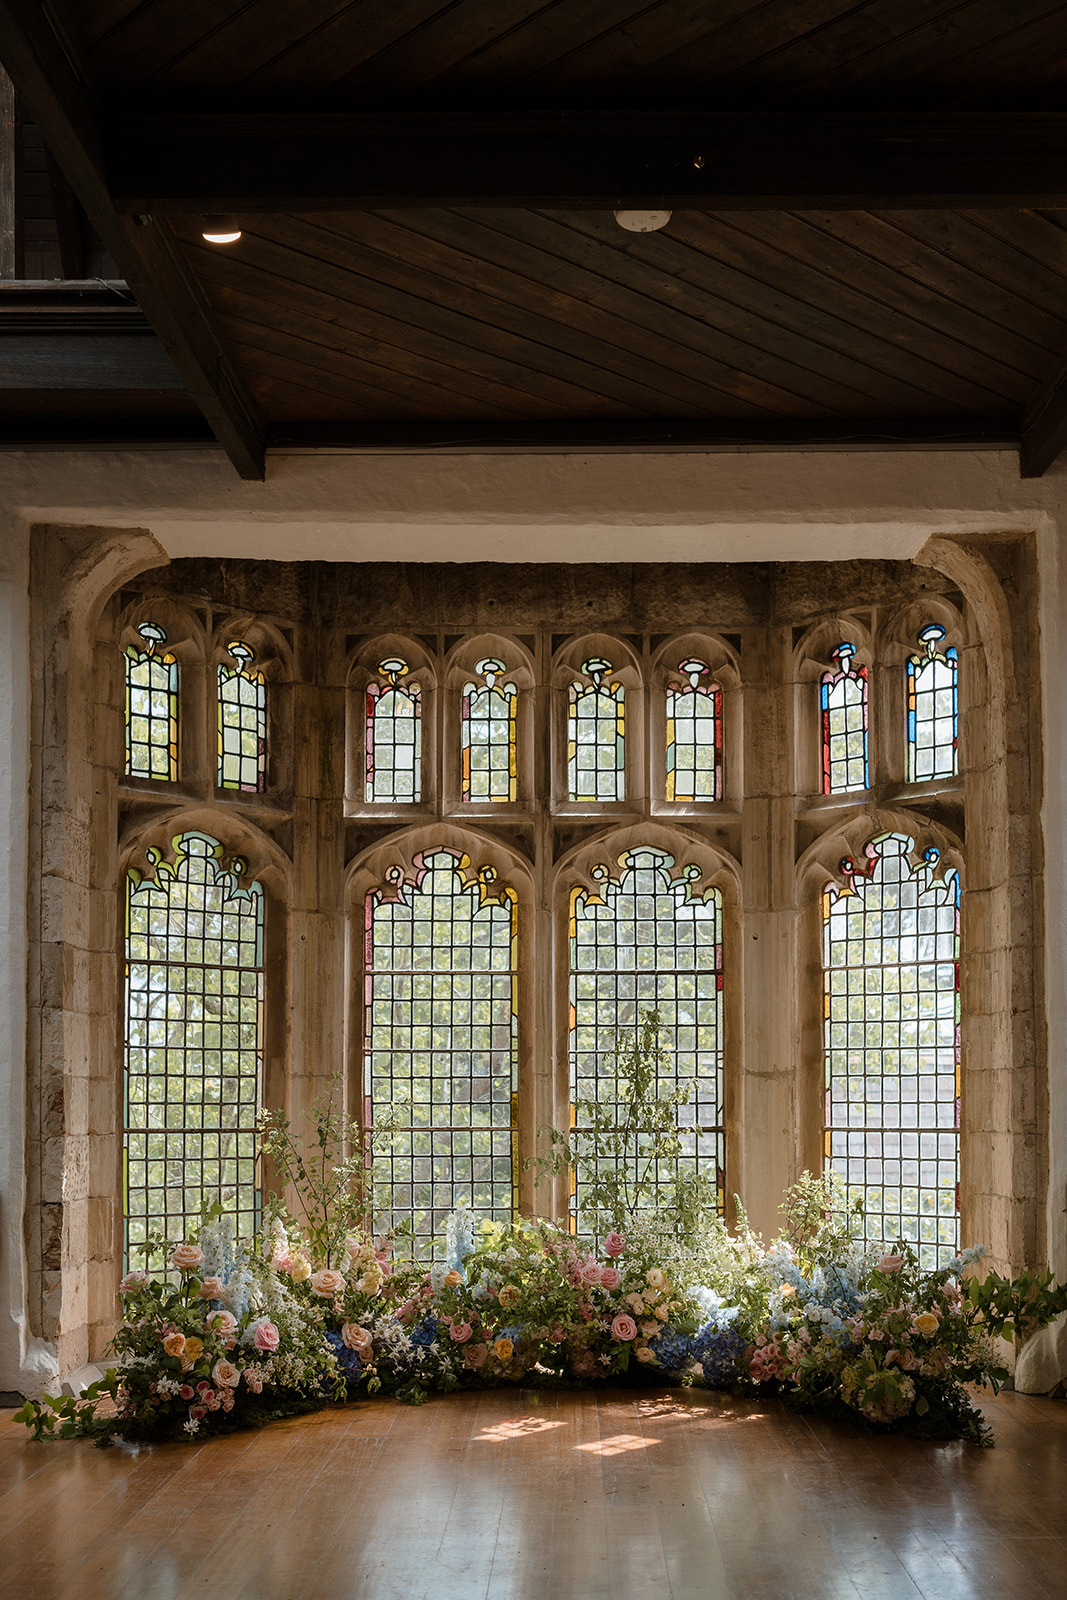 Lush floral arrangements adorn the altar at Montsalvat, creating a romantic ambiance for a wedding ceremony